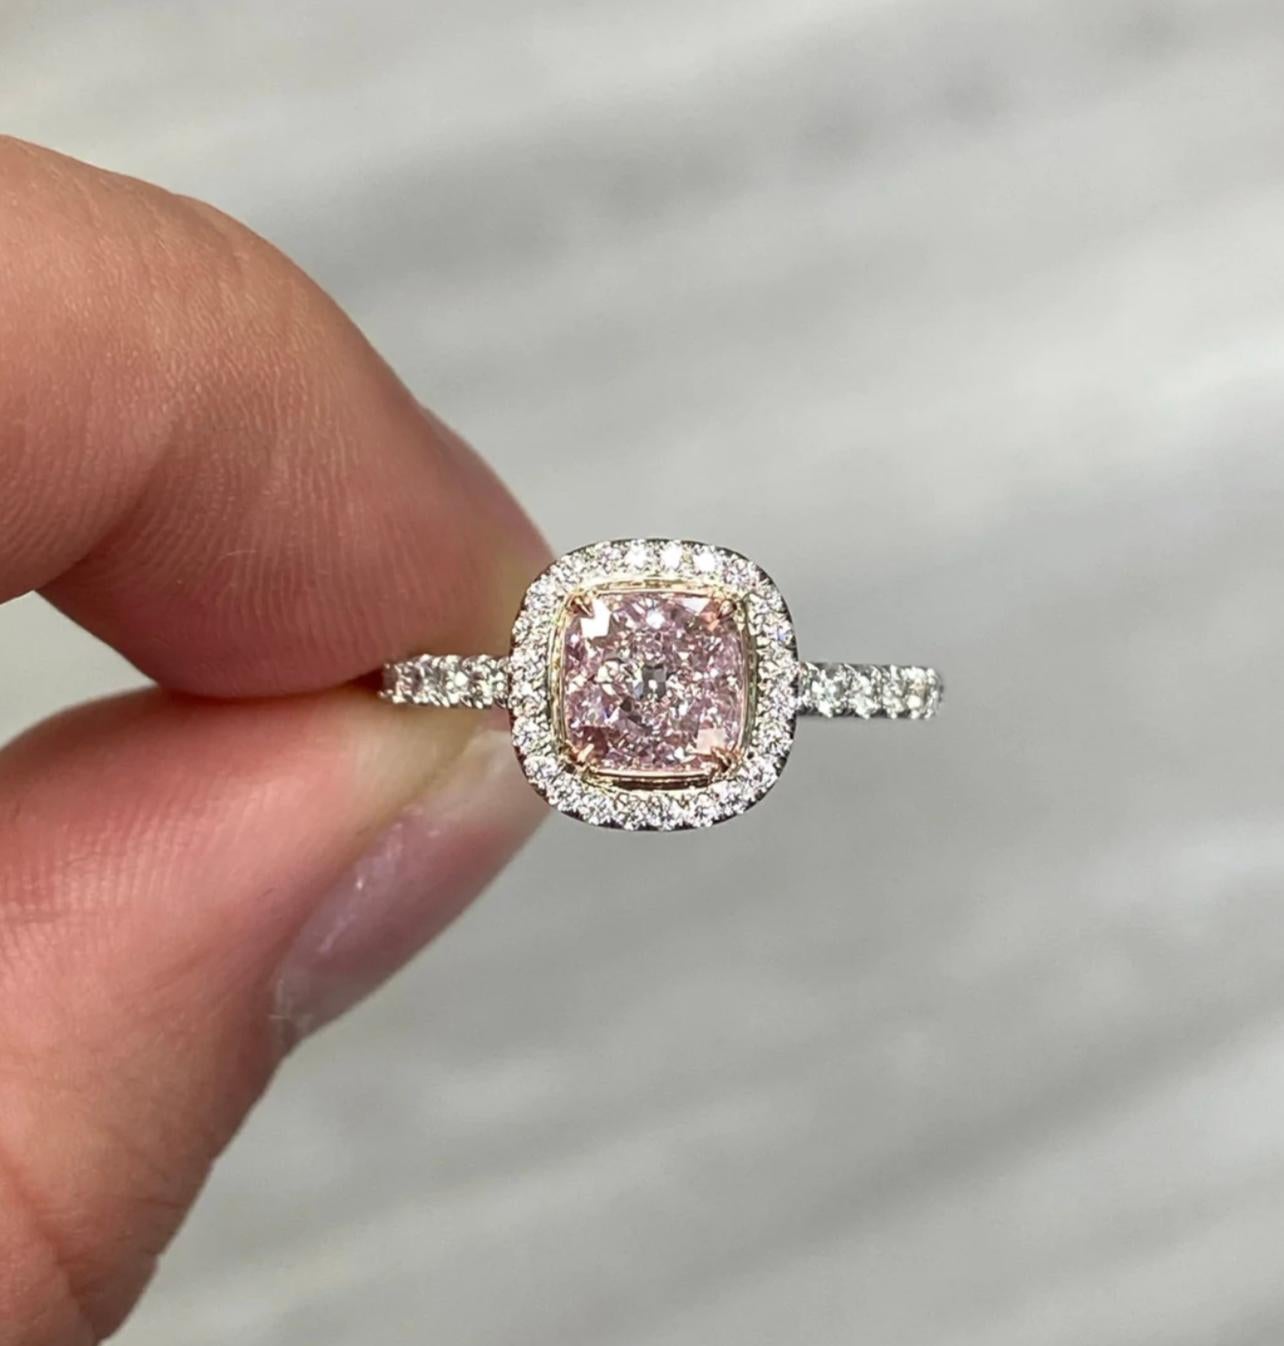 1.08 Carat 
GIA Certified Very Light Pink
Cushion Cut 
VS1 Clarity 
0.40 Carat White Diamonds 
Set in Platinum and Rose Gold in a diamond halo
Handmade in NYC 

Making Extraordinary Attainable with Rare Colors





